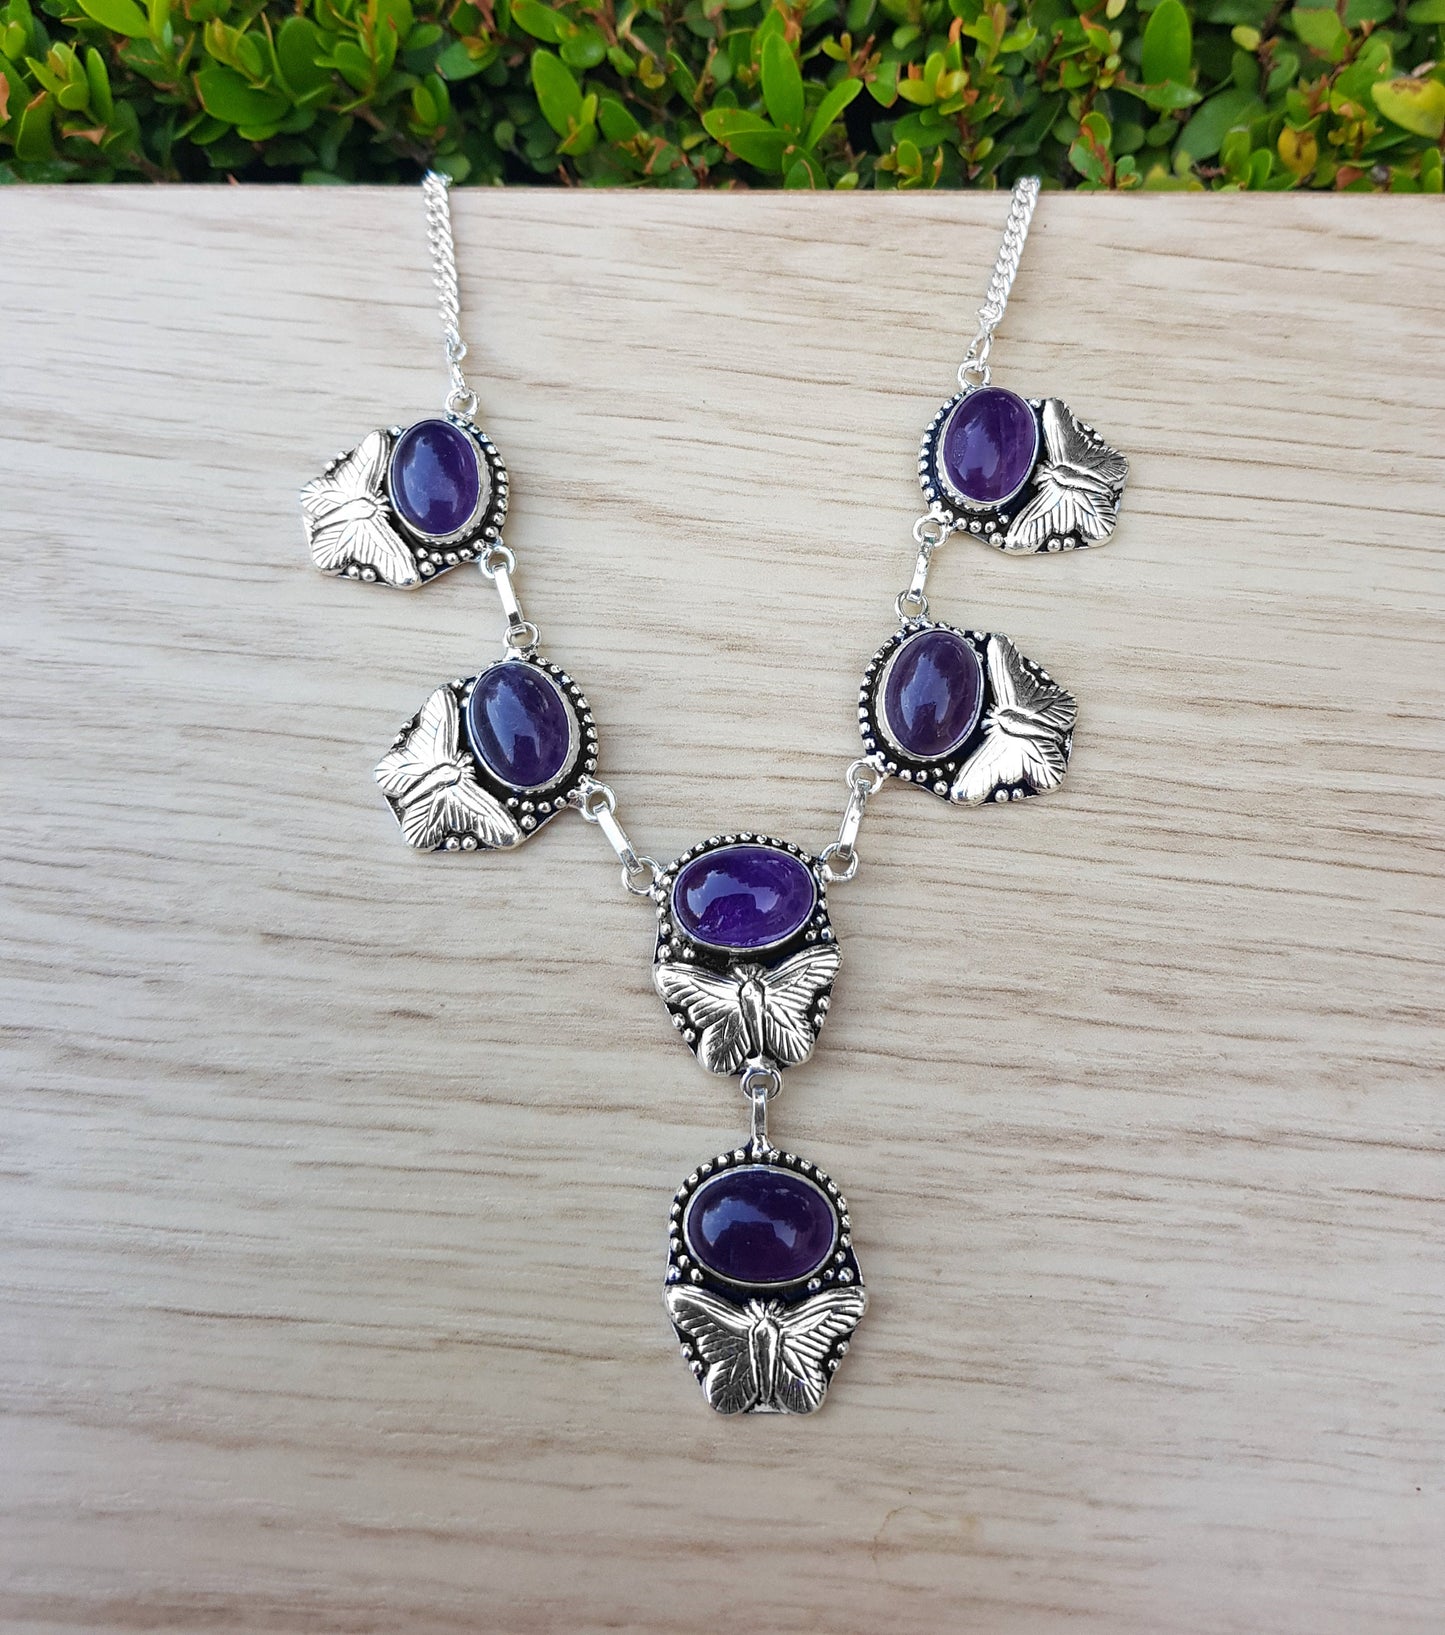 Amethyst Necklace And Earrings Set In Sterling Silver Statement Necklace Boho Crystal Necklace Unique Gift For Women